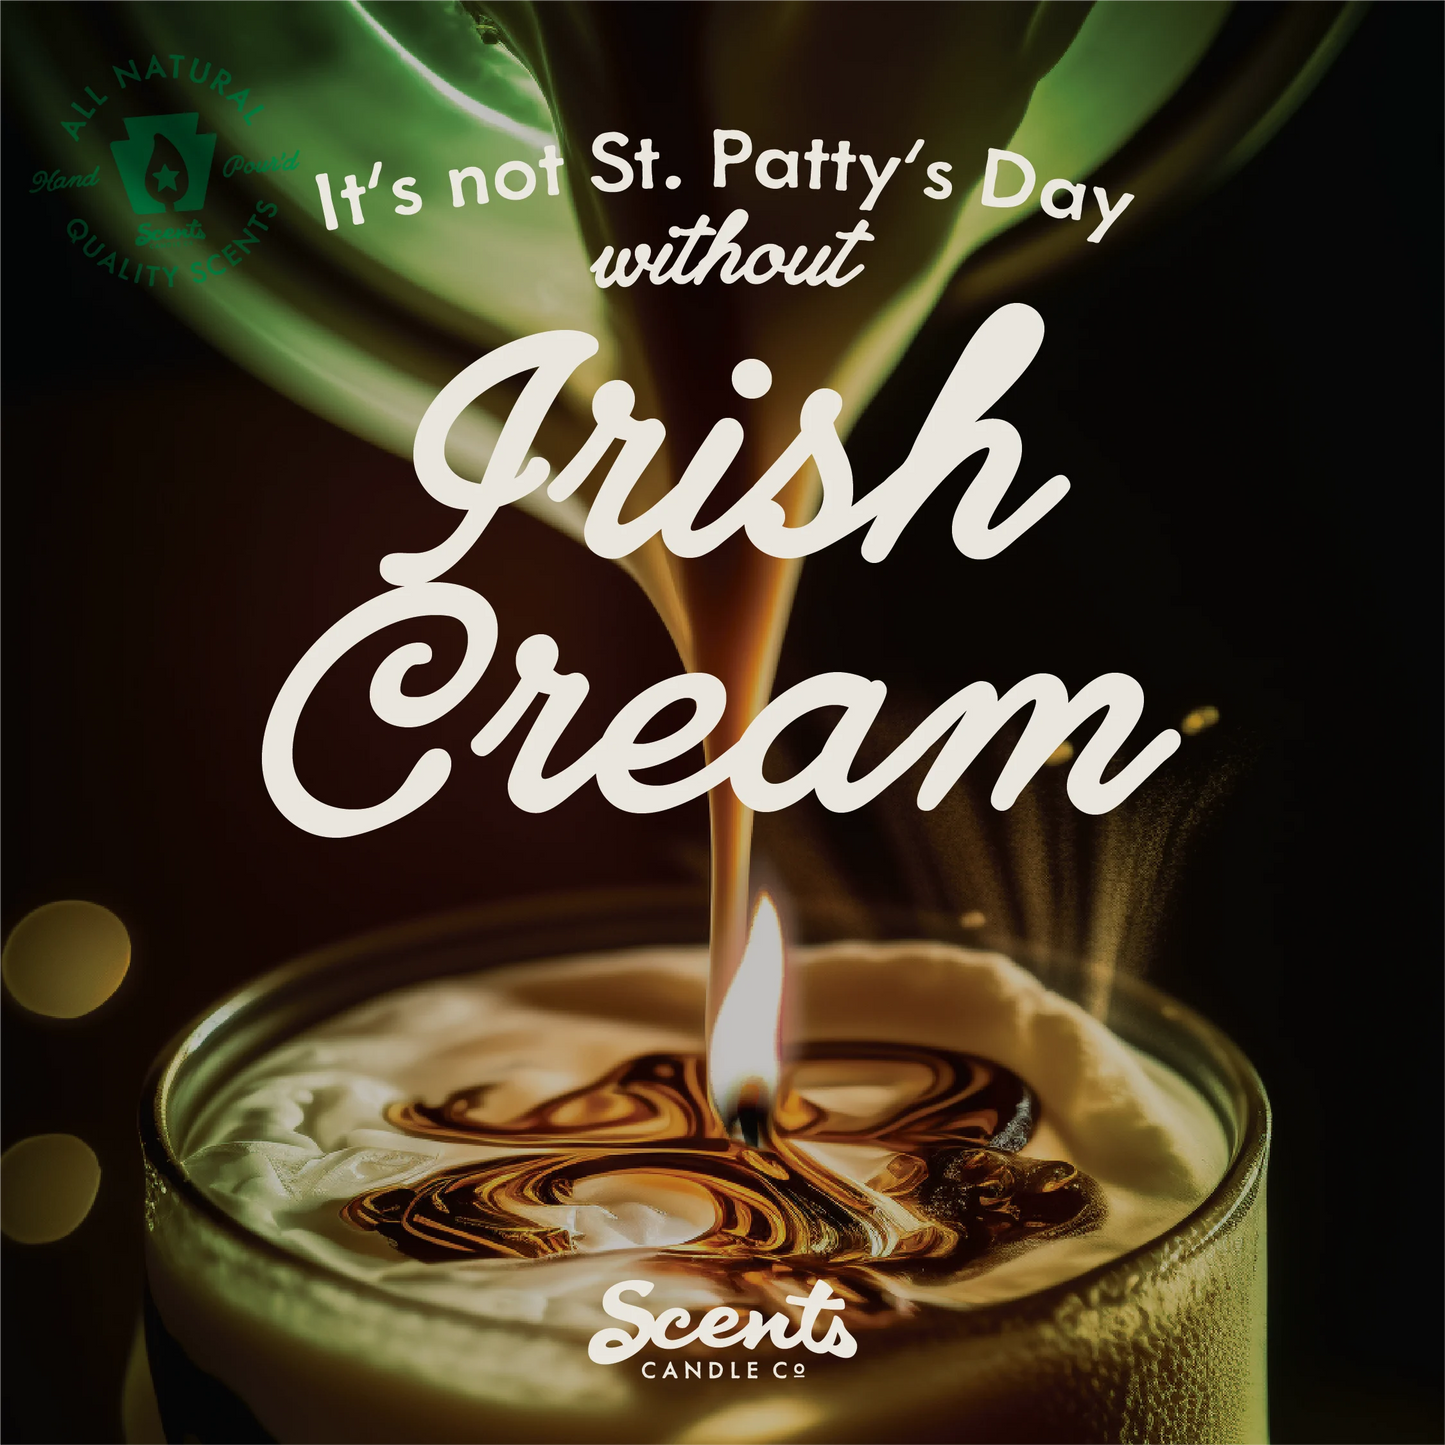 Scents Candle Co. Irish Cream Soy Wax Candle